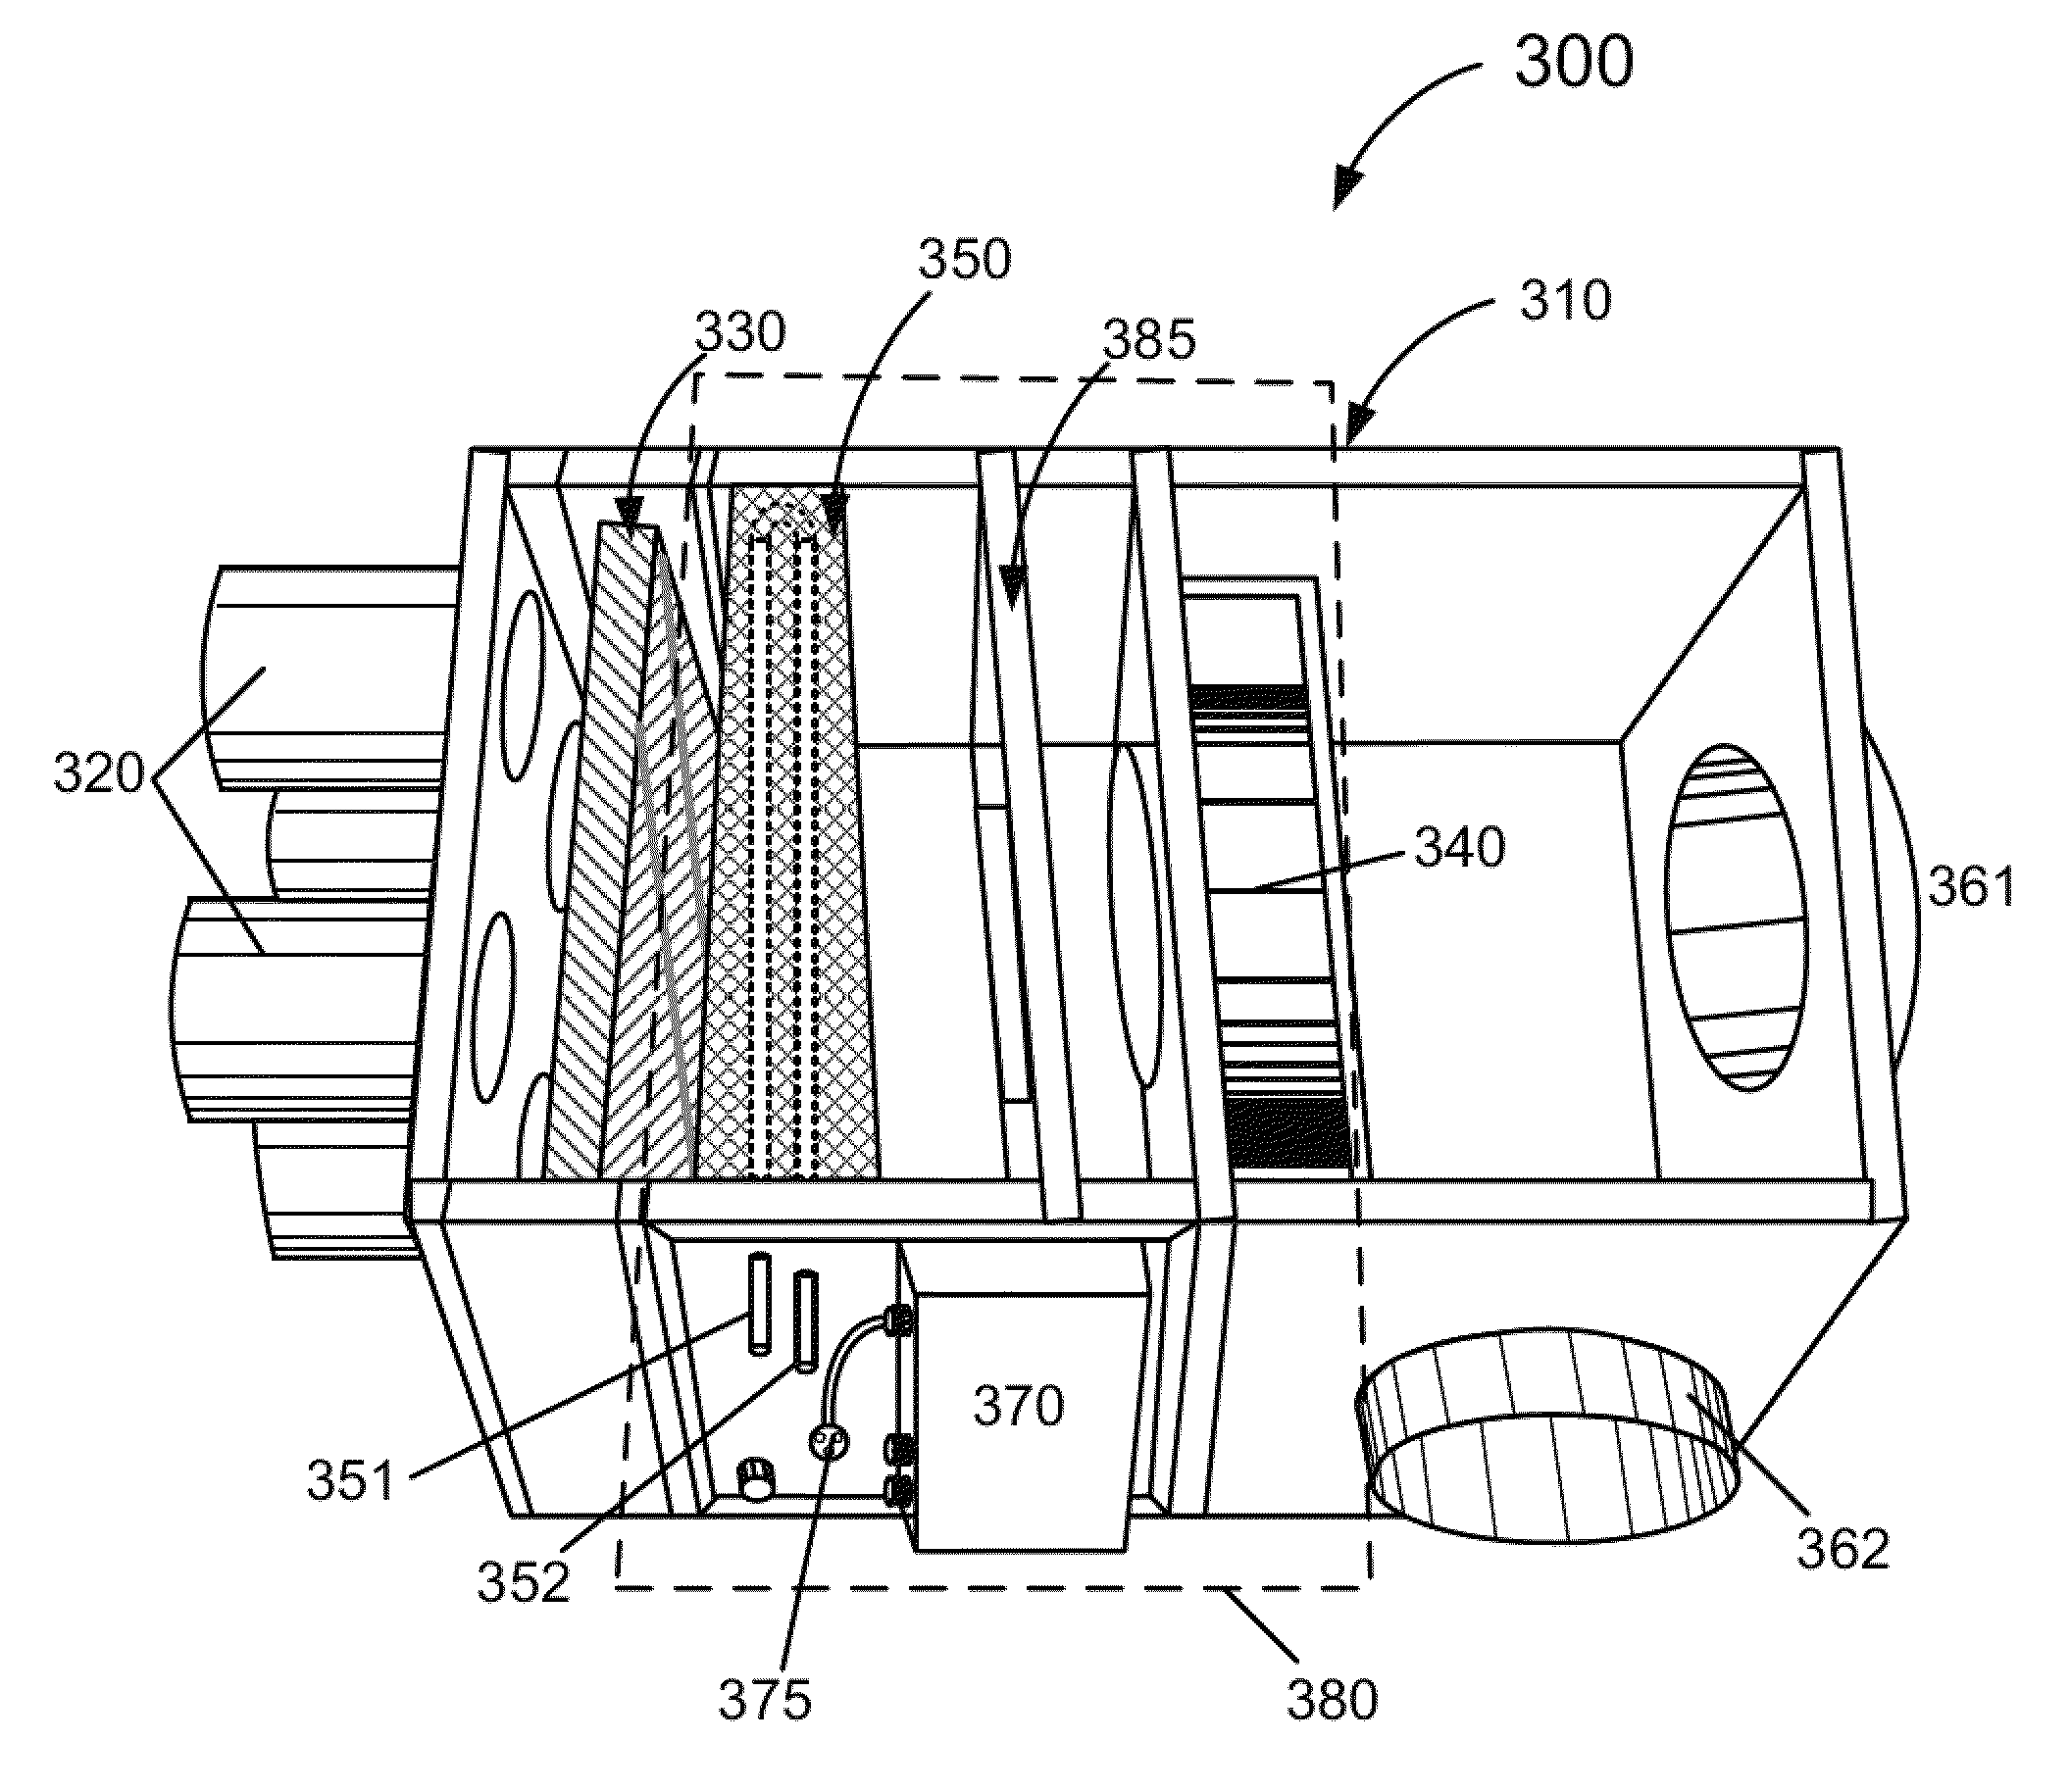 Energy transfer module utilizing thermal power generated by solar panels